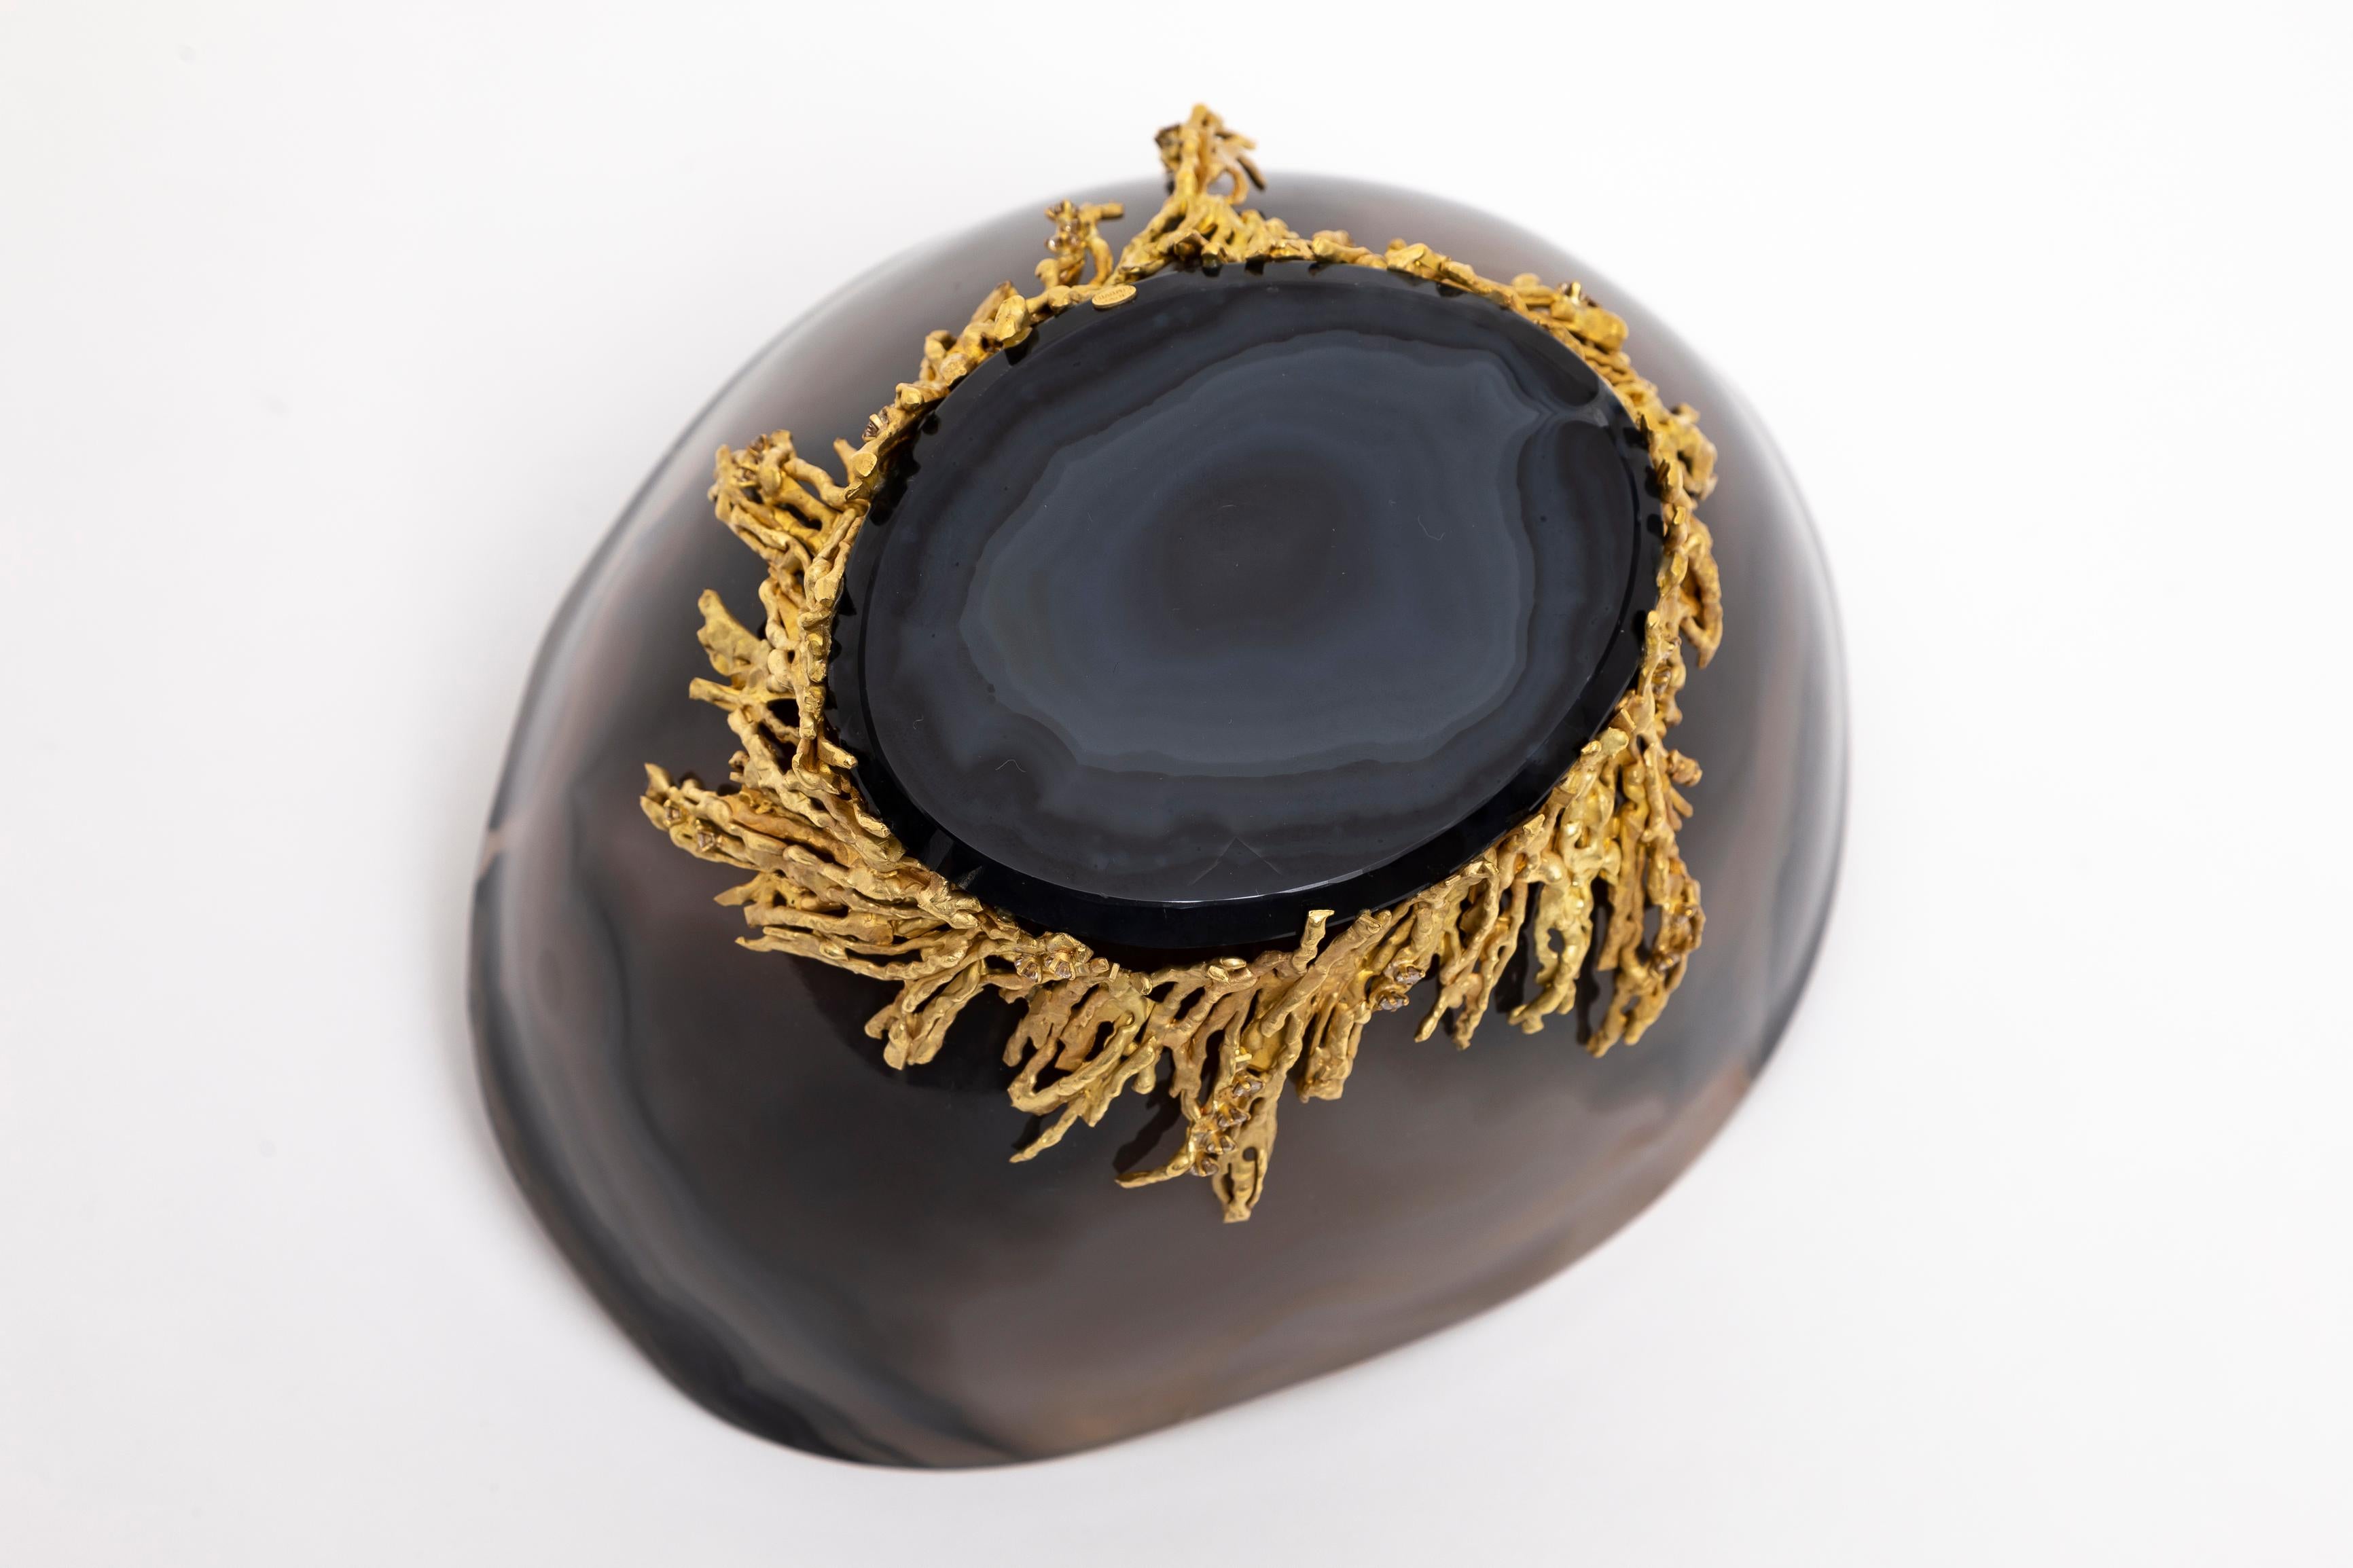 An Incredible Chaumet Paris Gold & Diamond Mounted Carved Agate Bowl For Sale 6